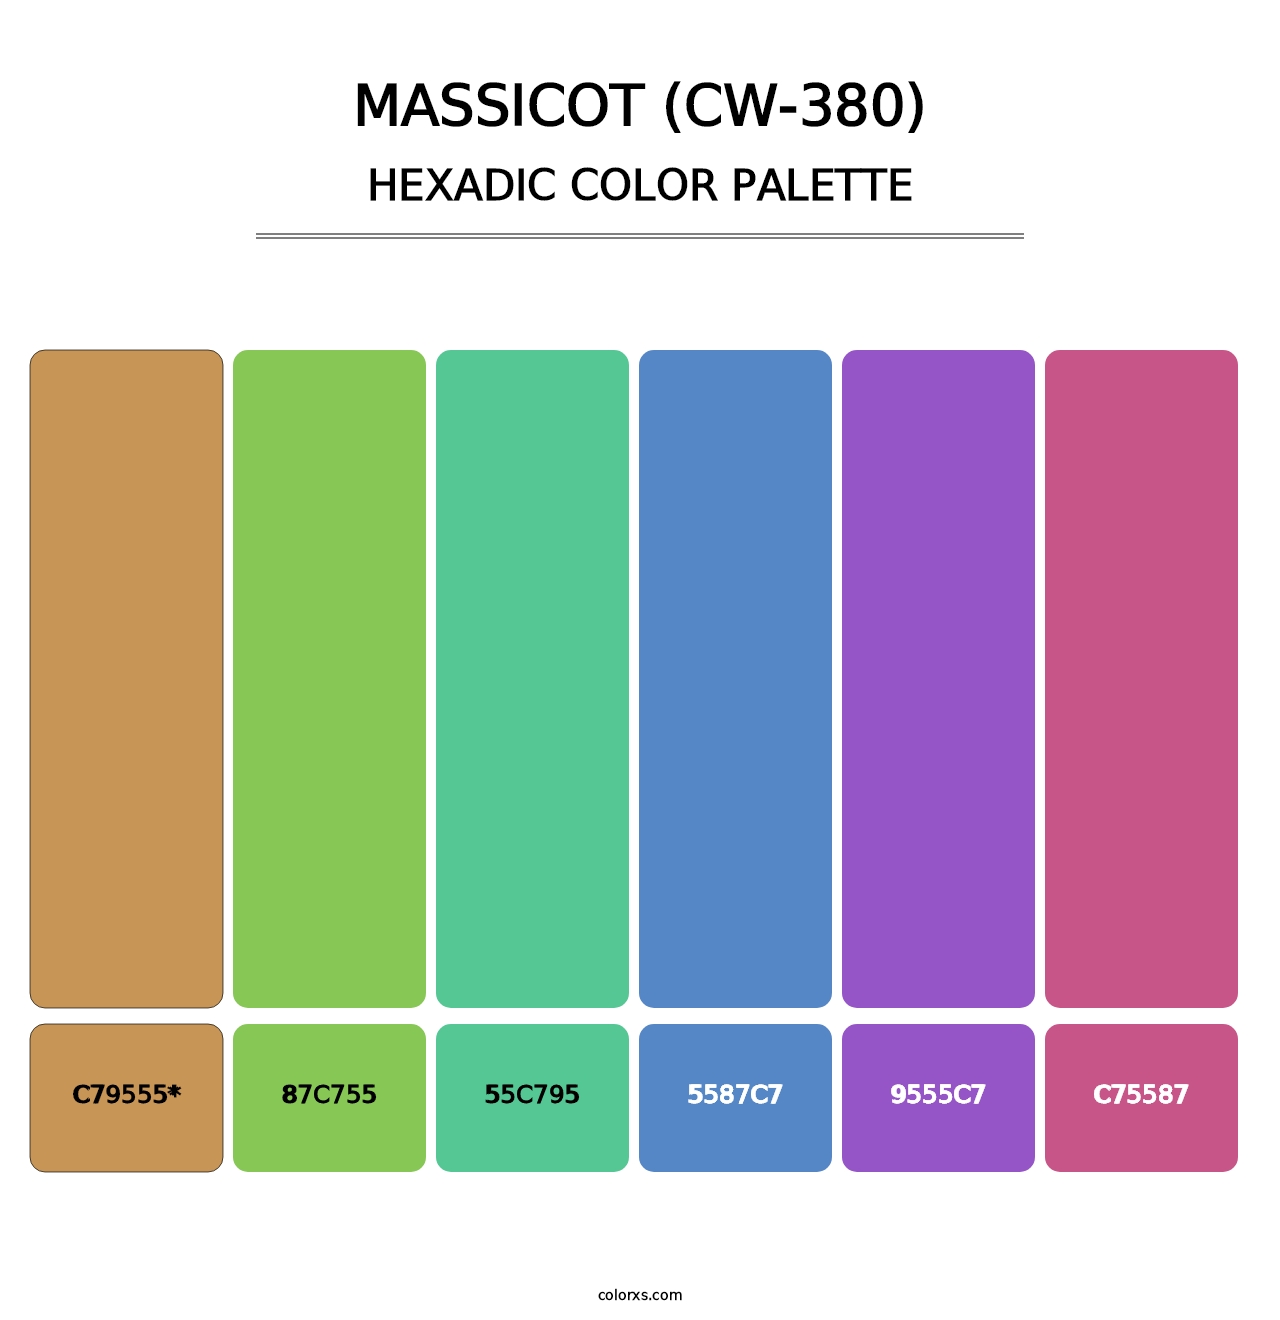 Massicot (CW-380) - Hexadic Color Palette